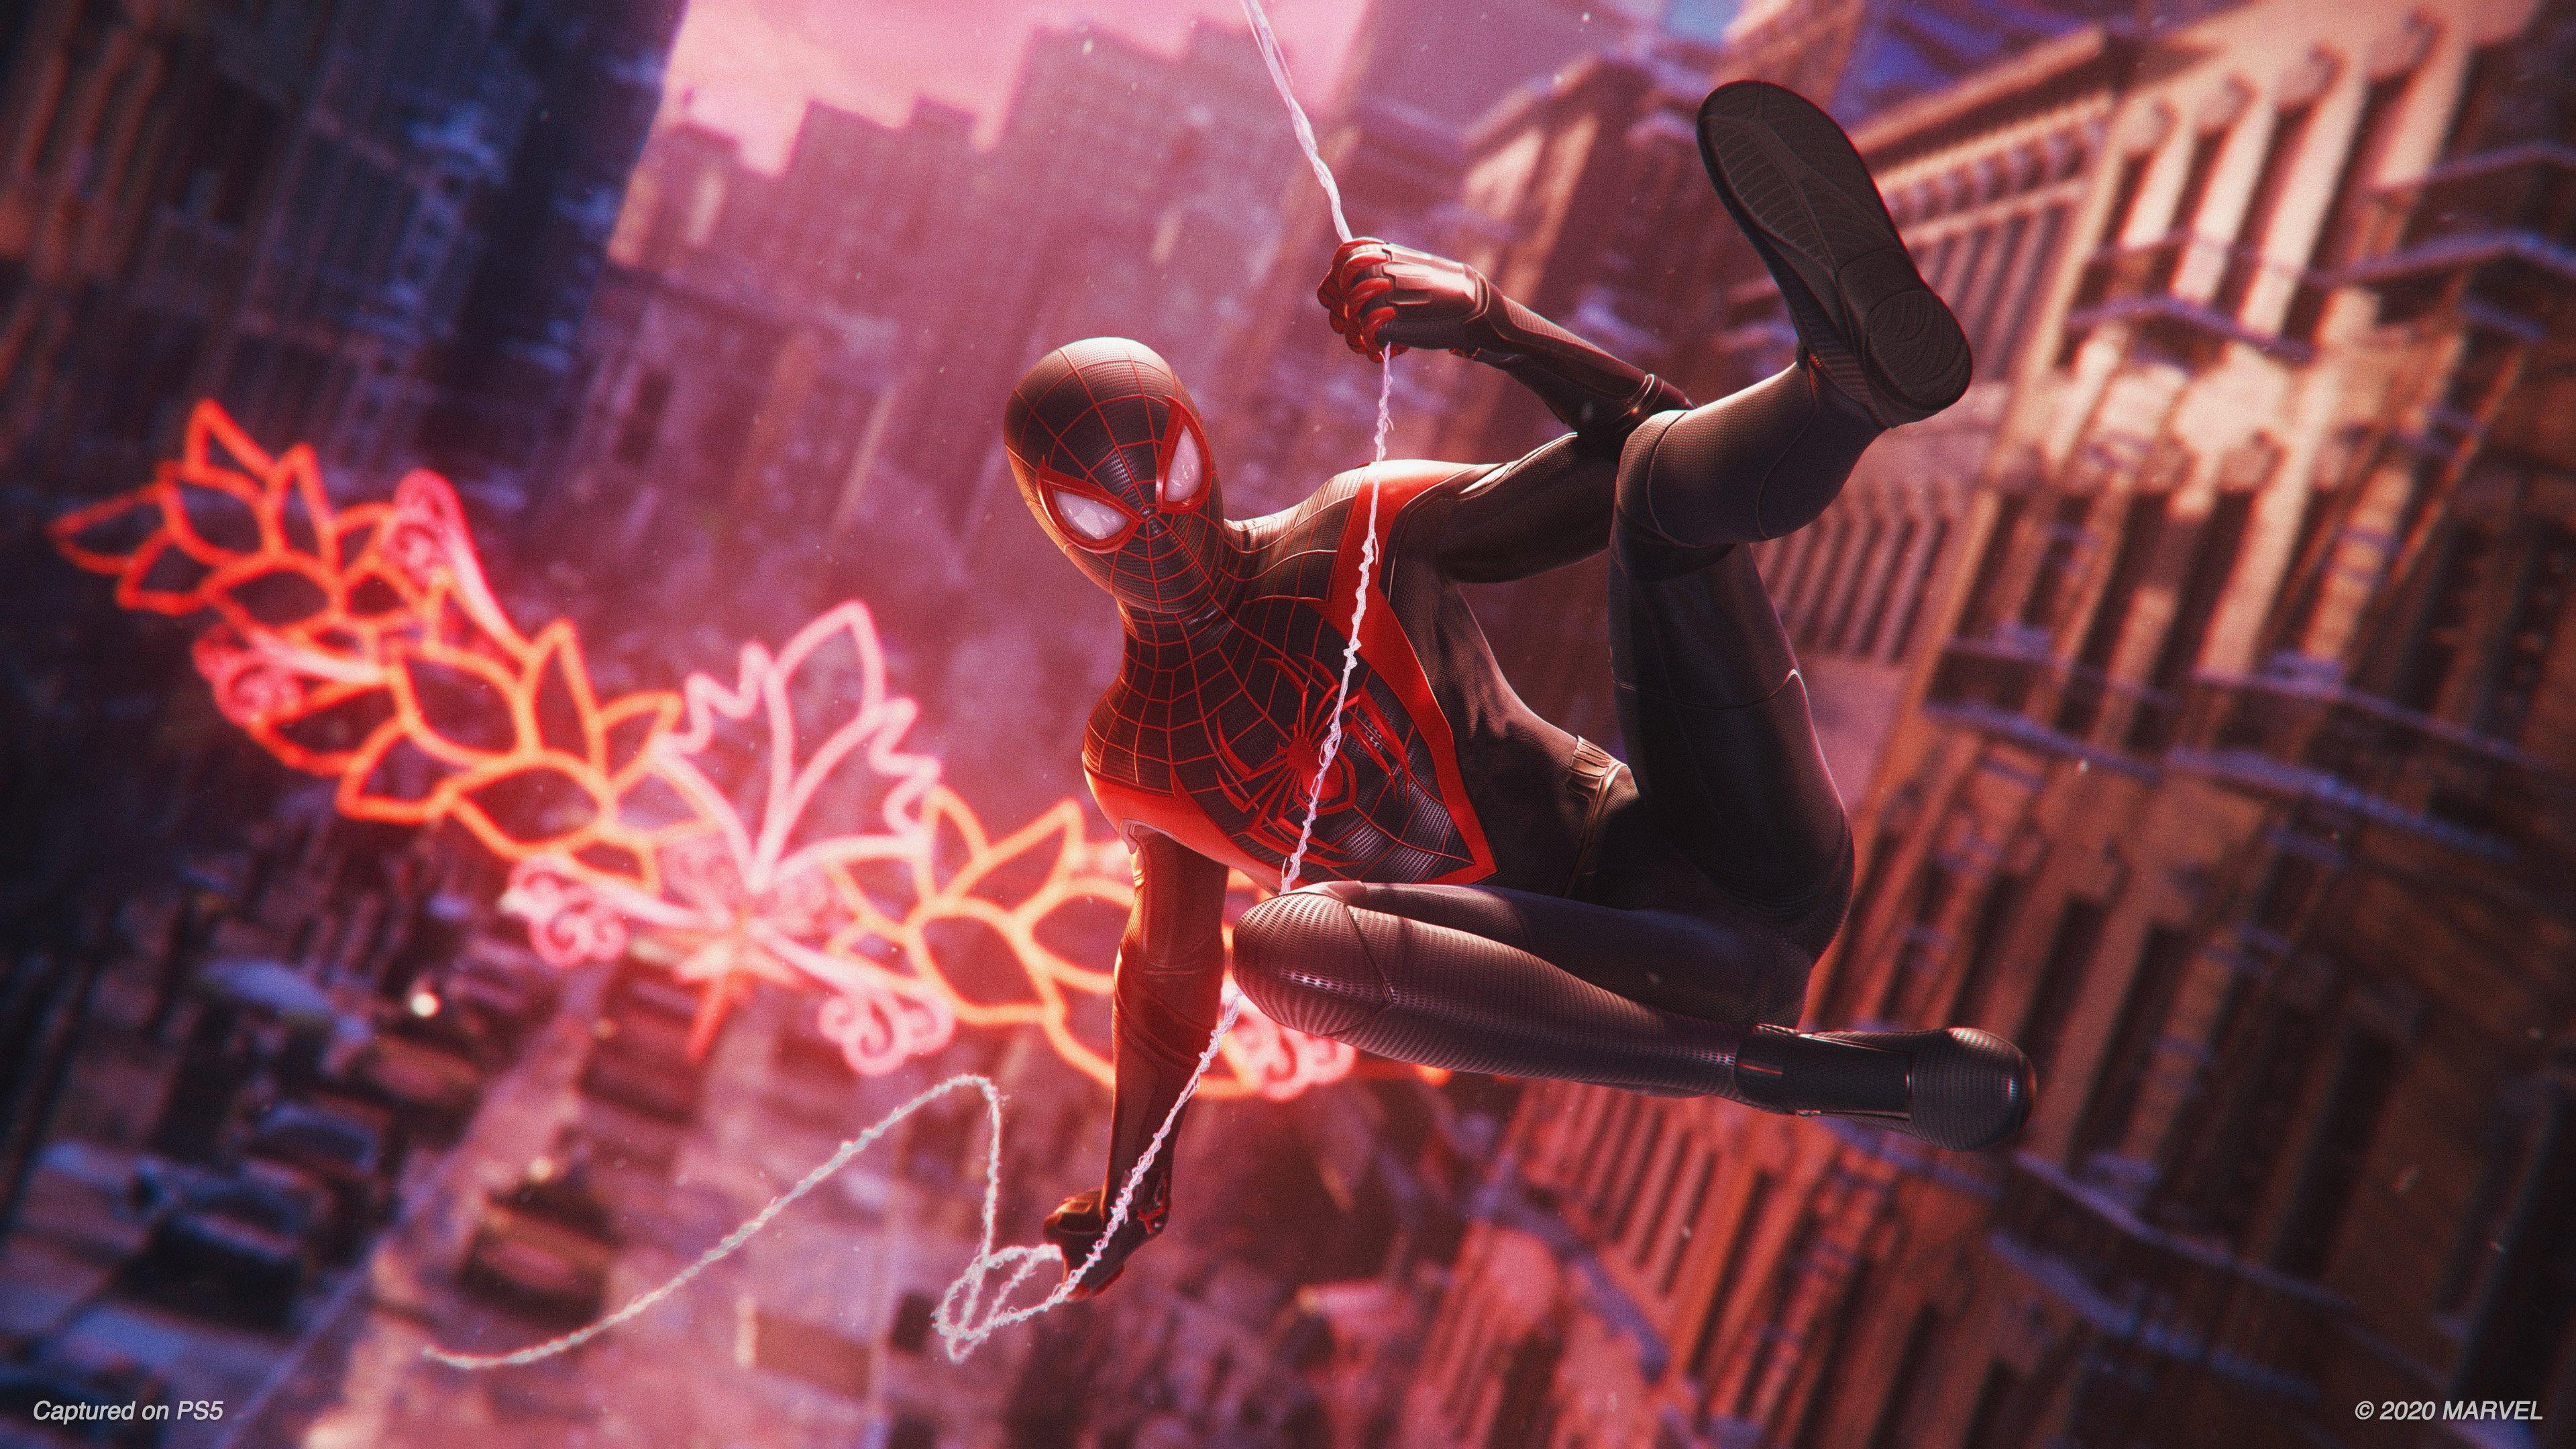 Marvel's Spider-Man: Miles Morales, Steam - Game Key for PC